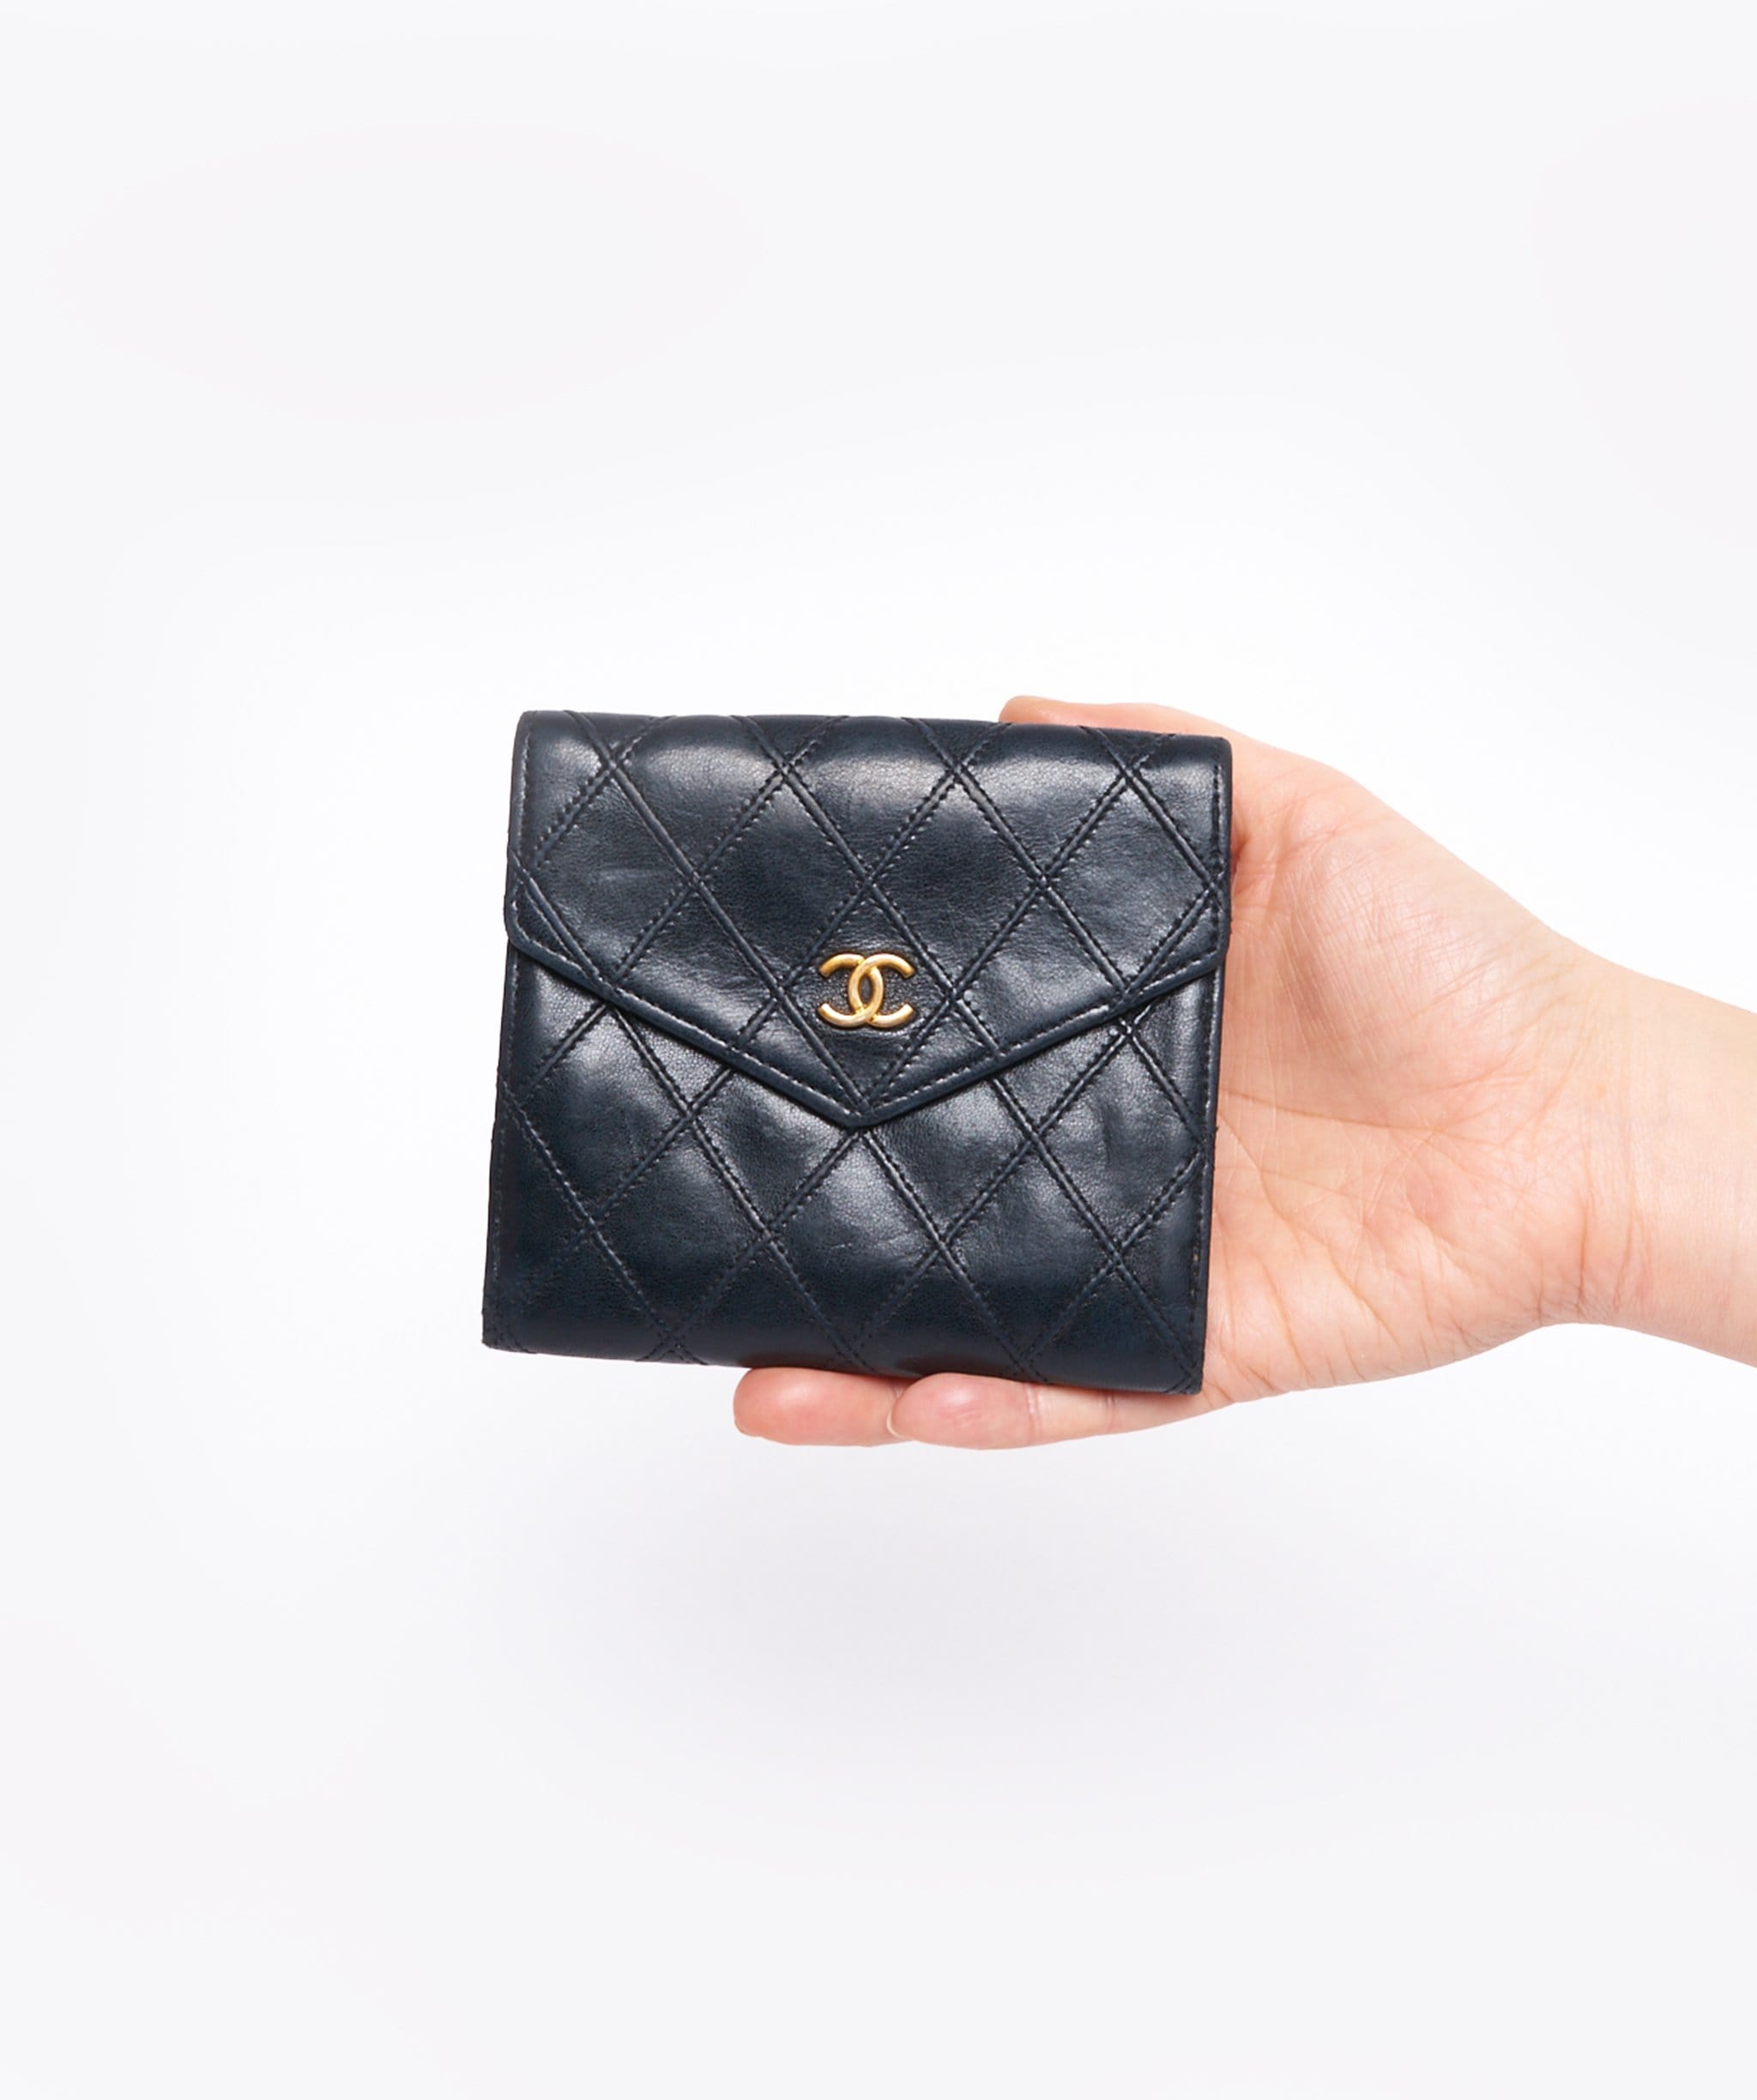 Chanel Chanel Quilted Wallet